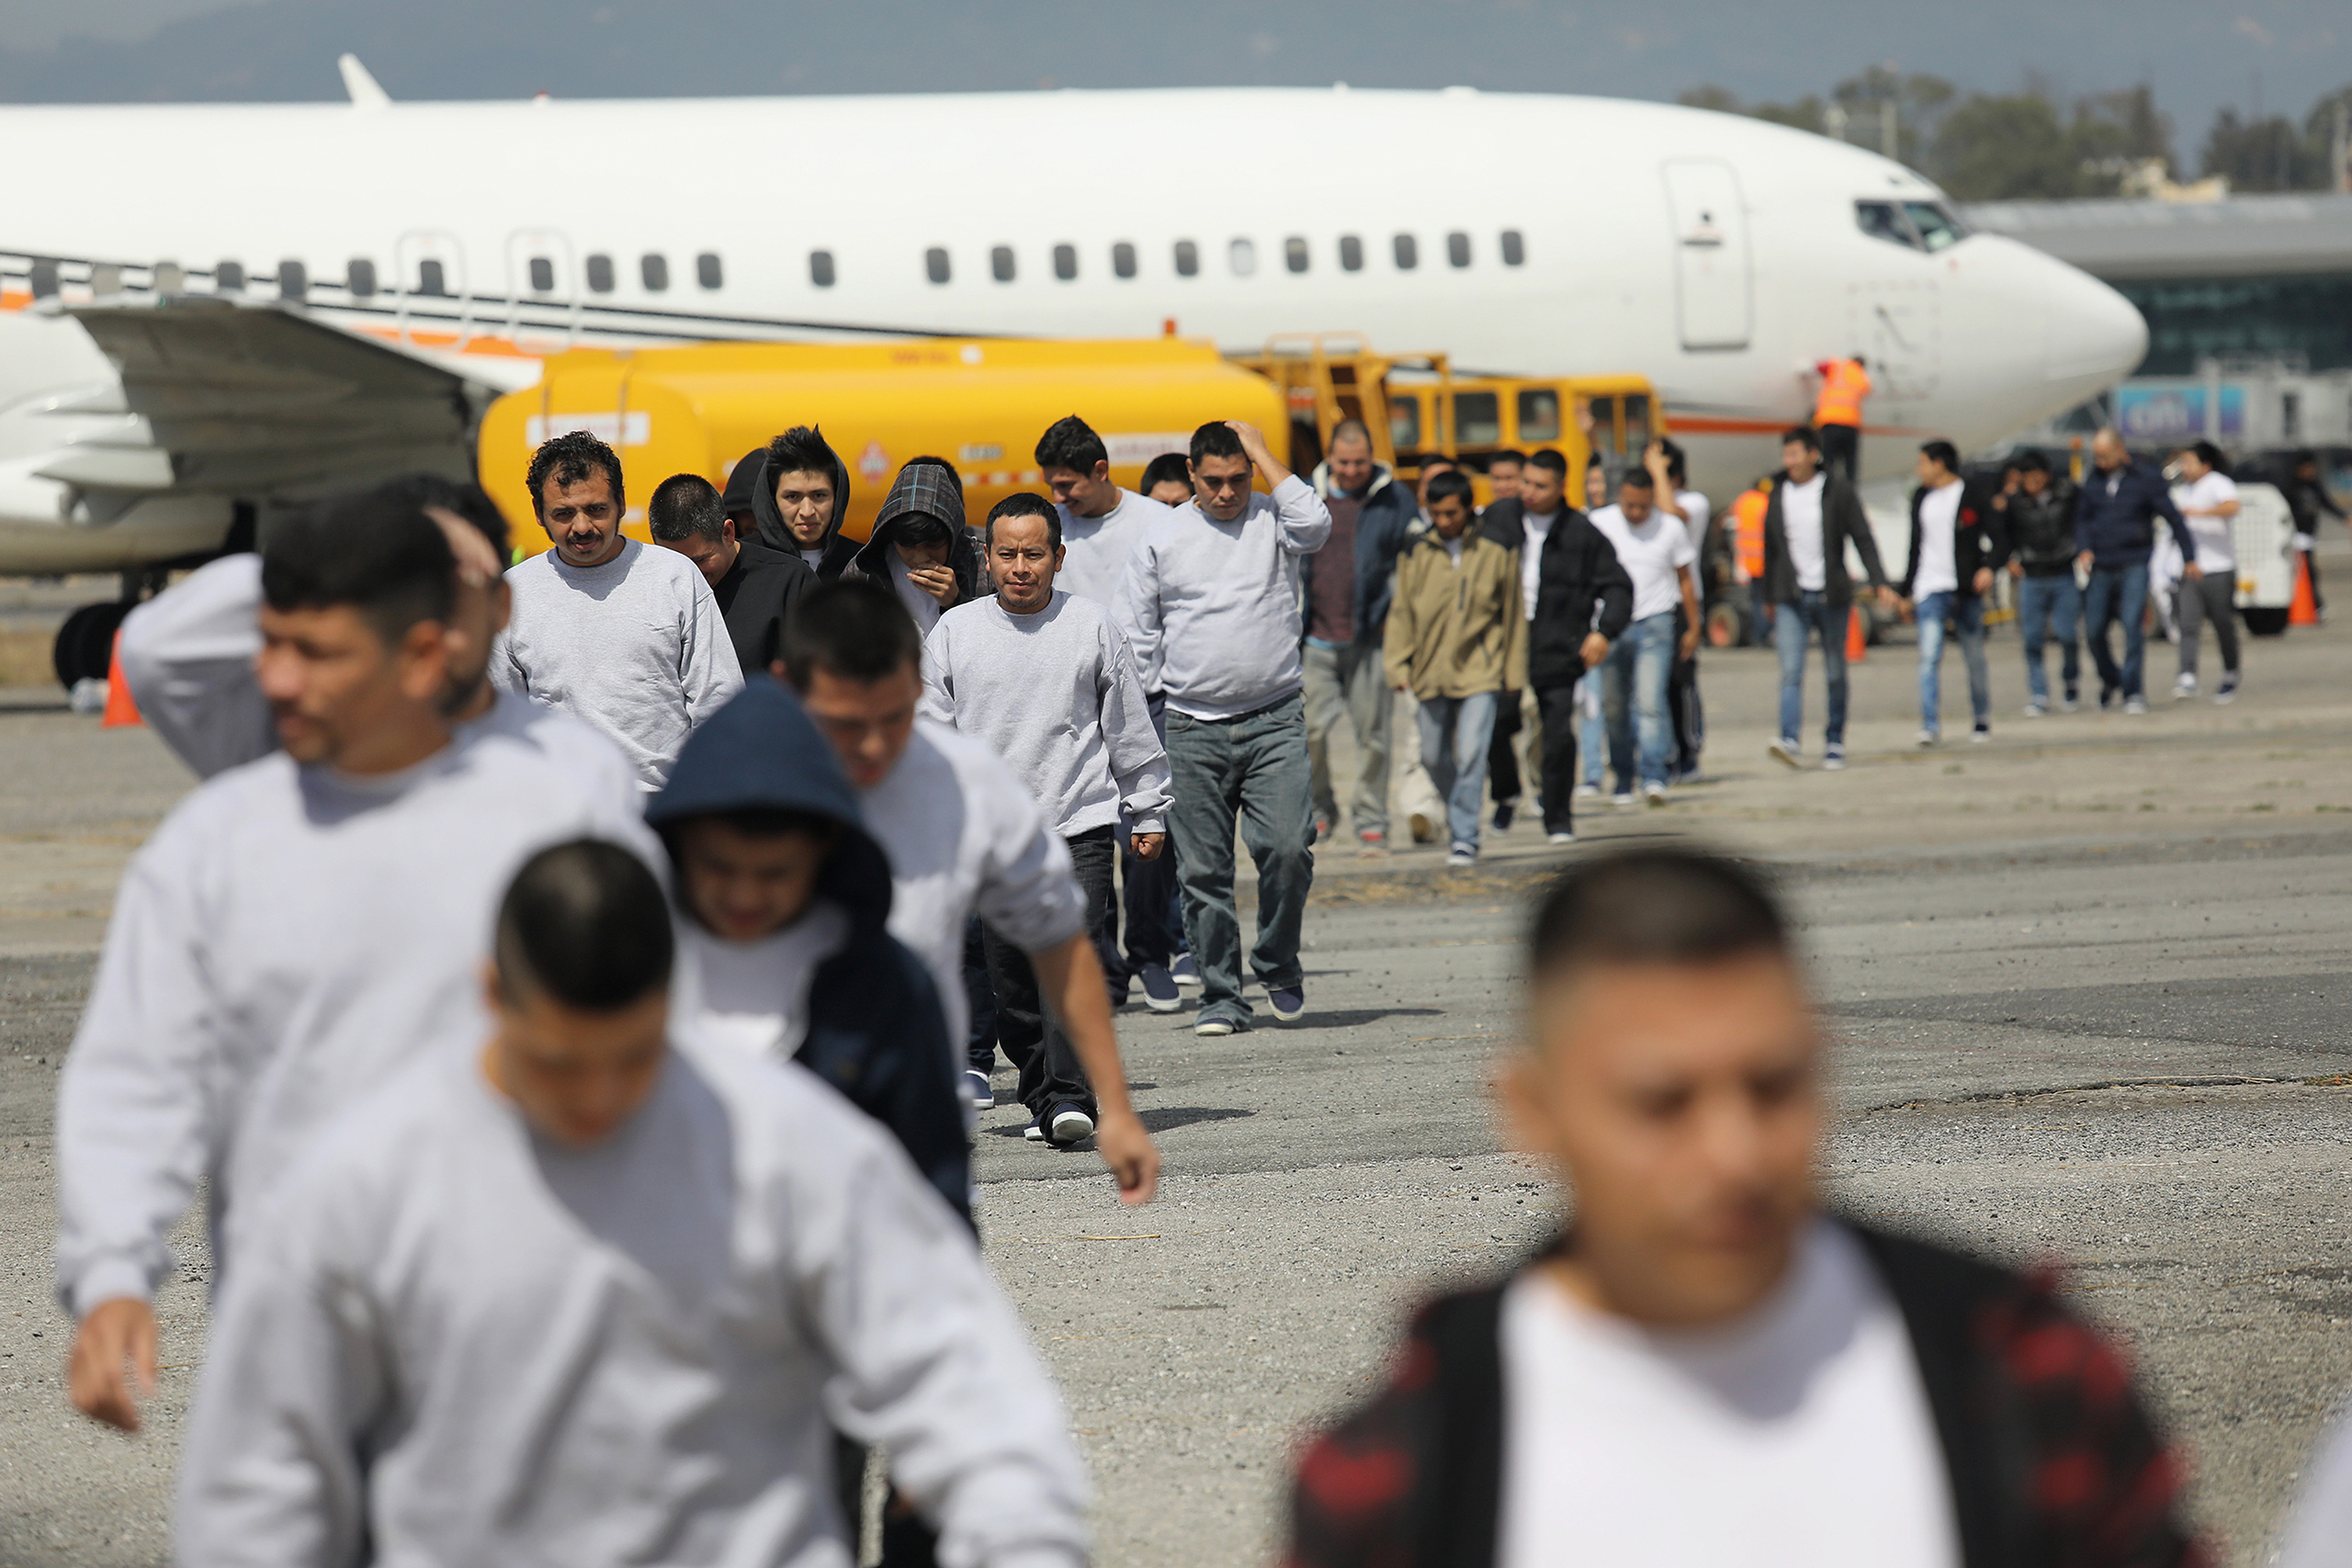 More than 100 immigrants deported from the U.S. returned to Guatemala in early February. (John Moore—Getty Images)